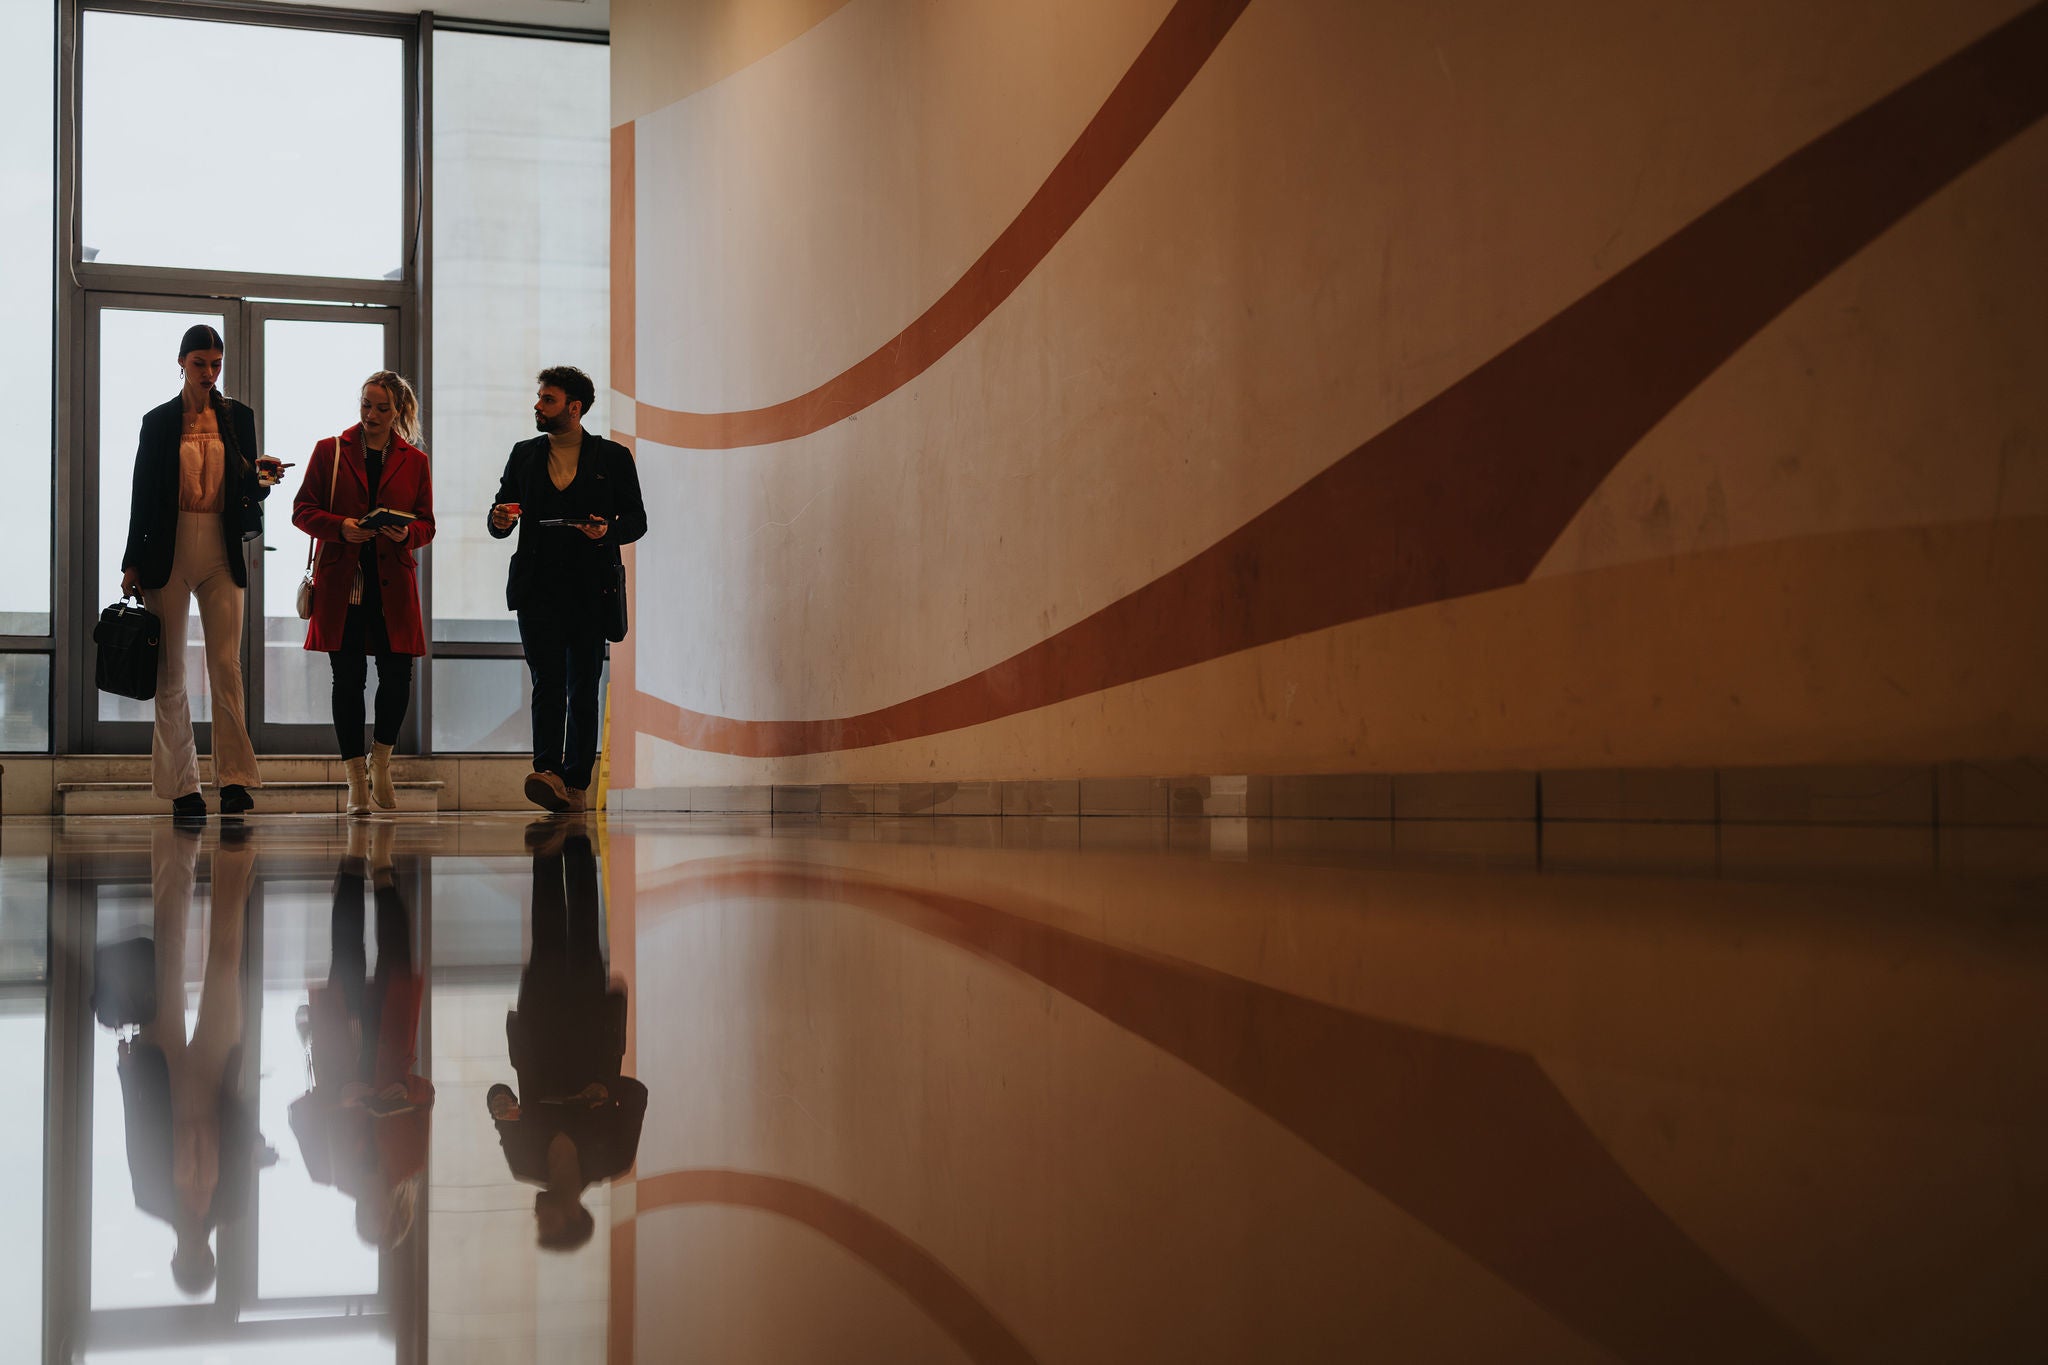 Three business colleagues discussing work while walking in a spacious office corridor with reflective floor and geometric wall pattern.